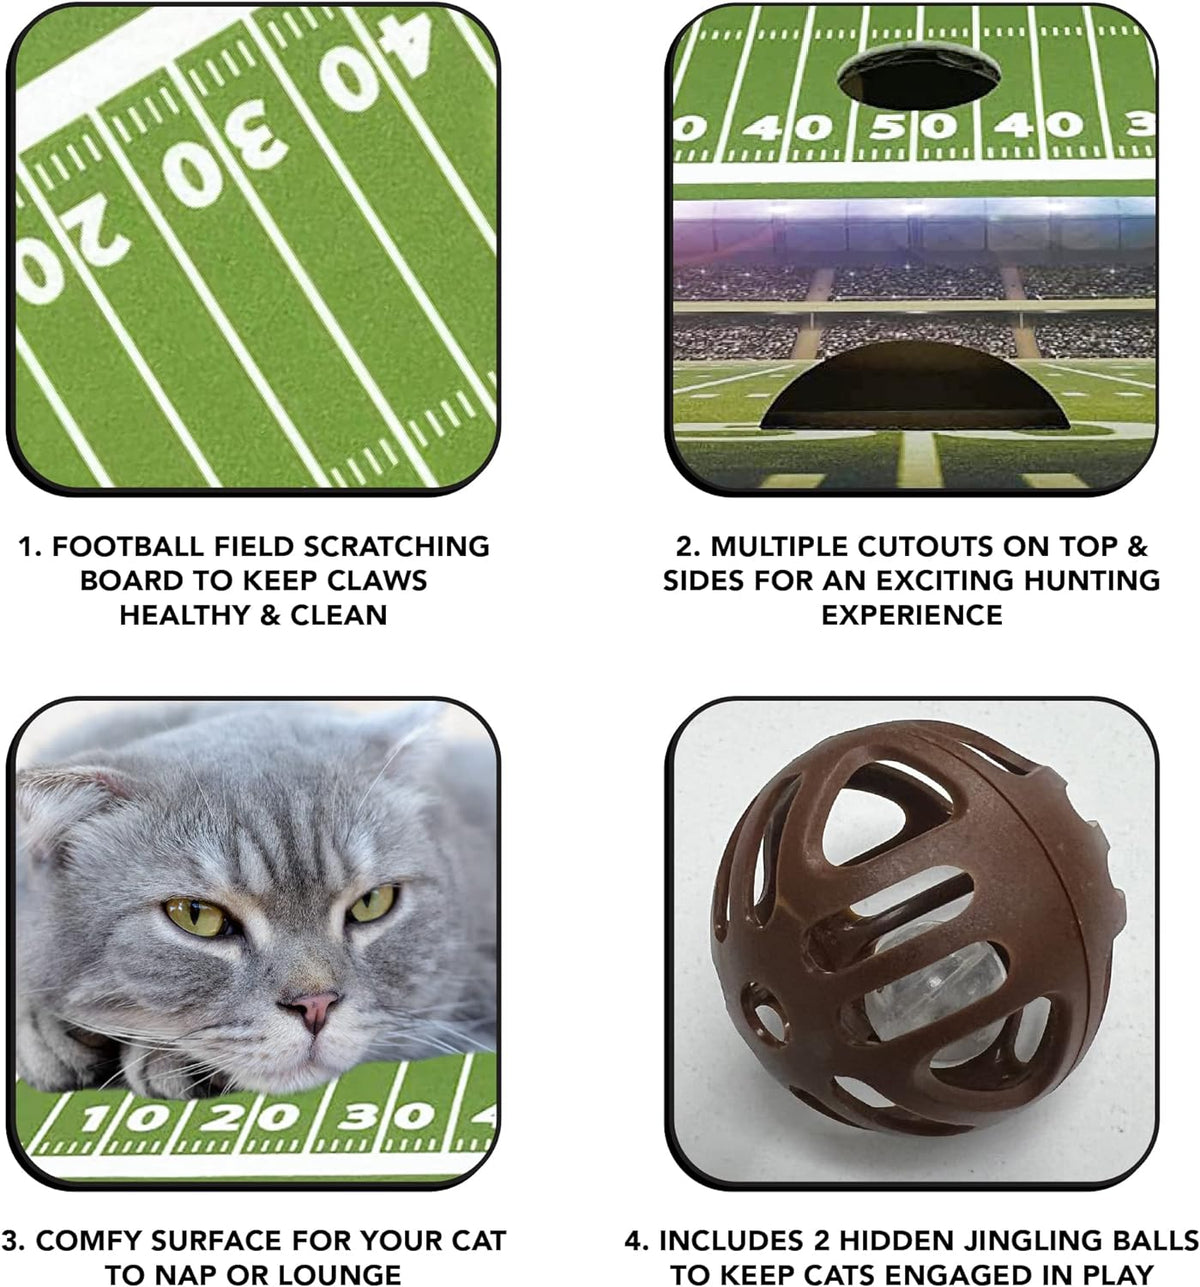 Indianapolis Colts Football Stadium Cat Scratcher Toy